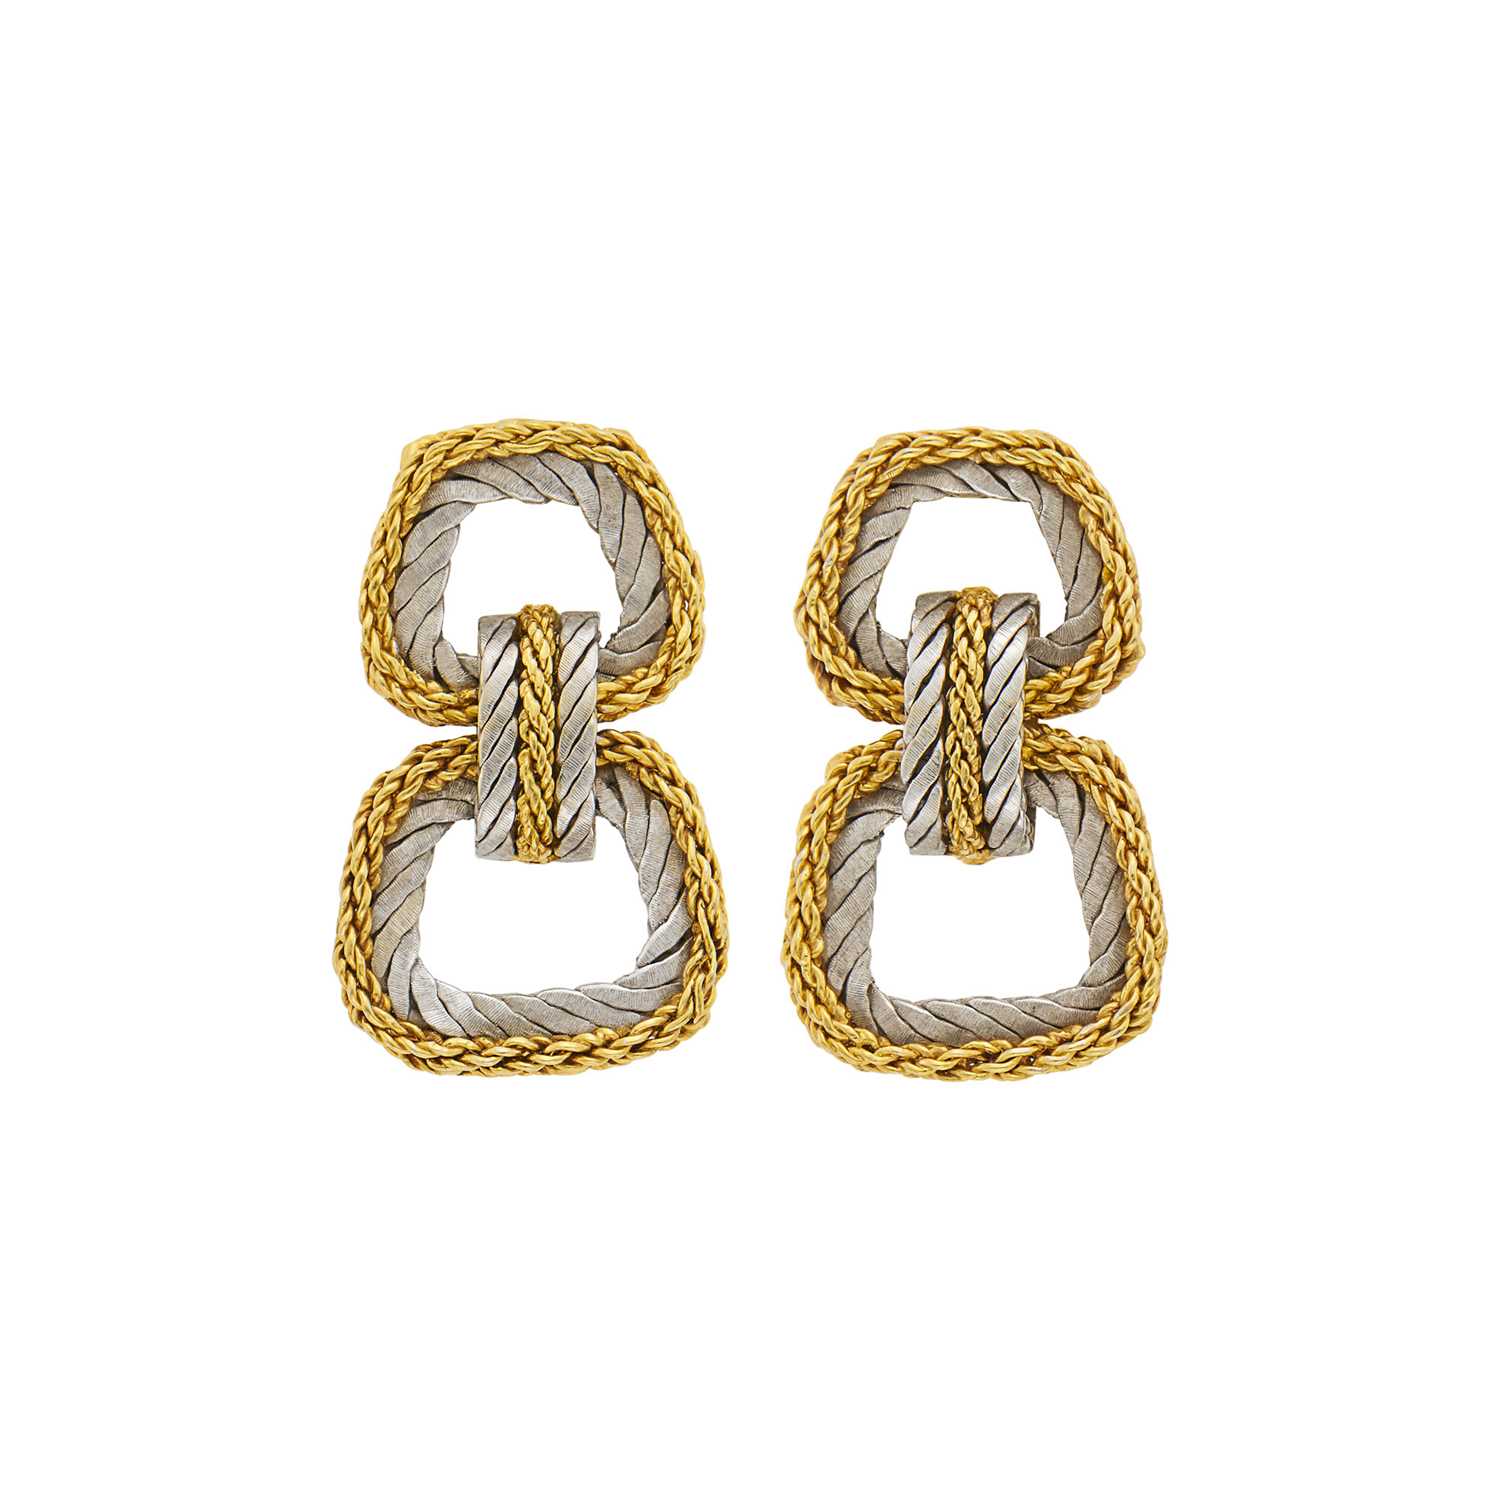 Lot 1162 - Buccellati Pair of Two-Color Gold Door Knocker Earclips